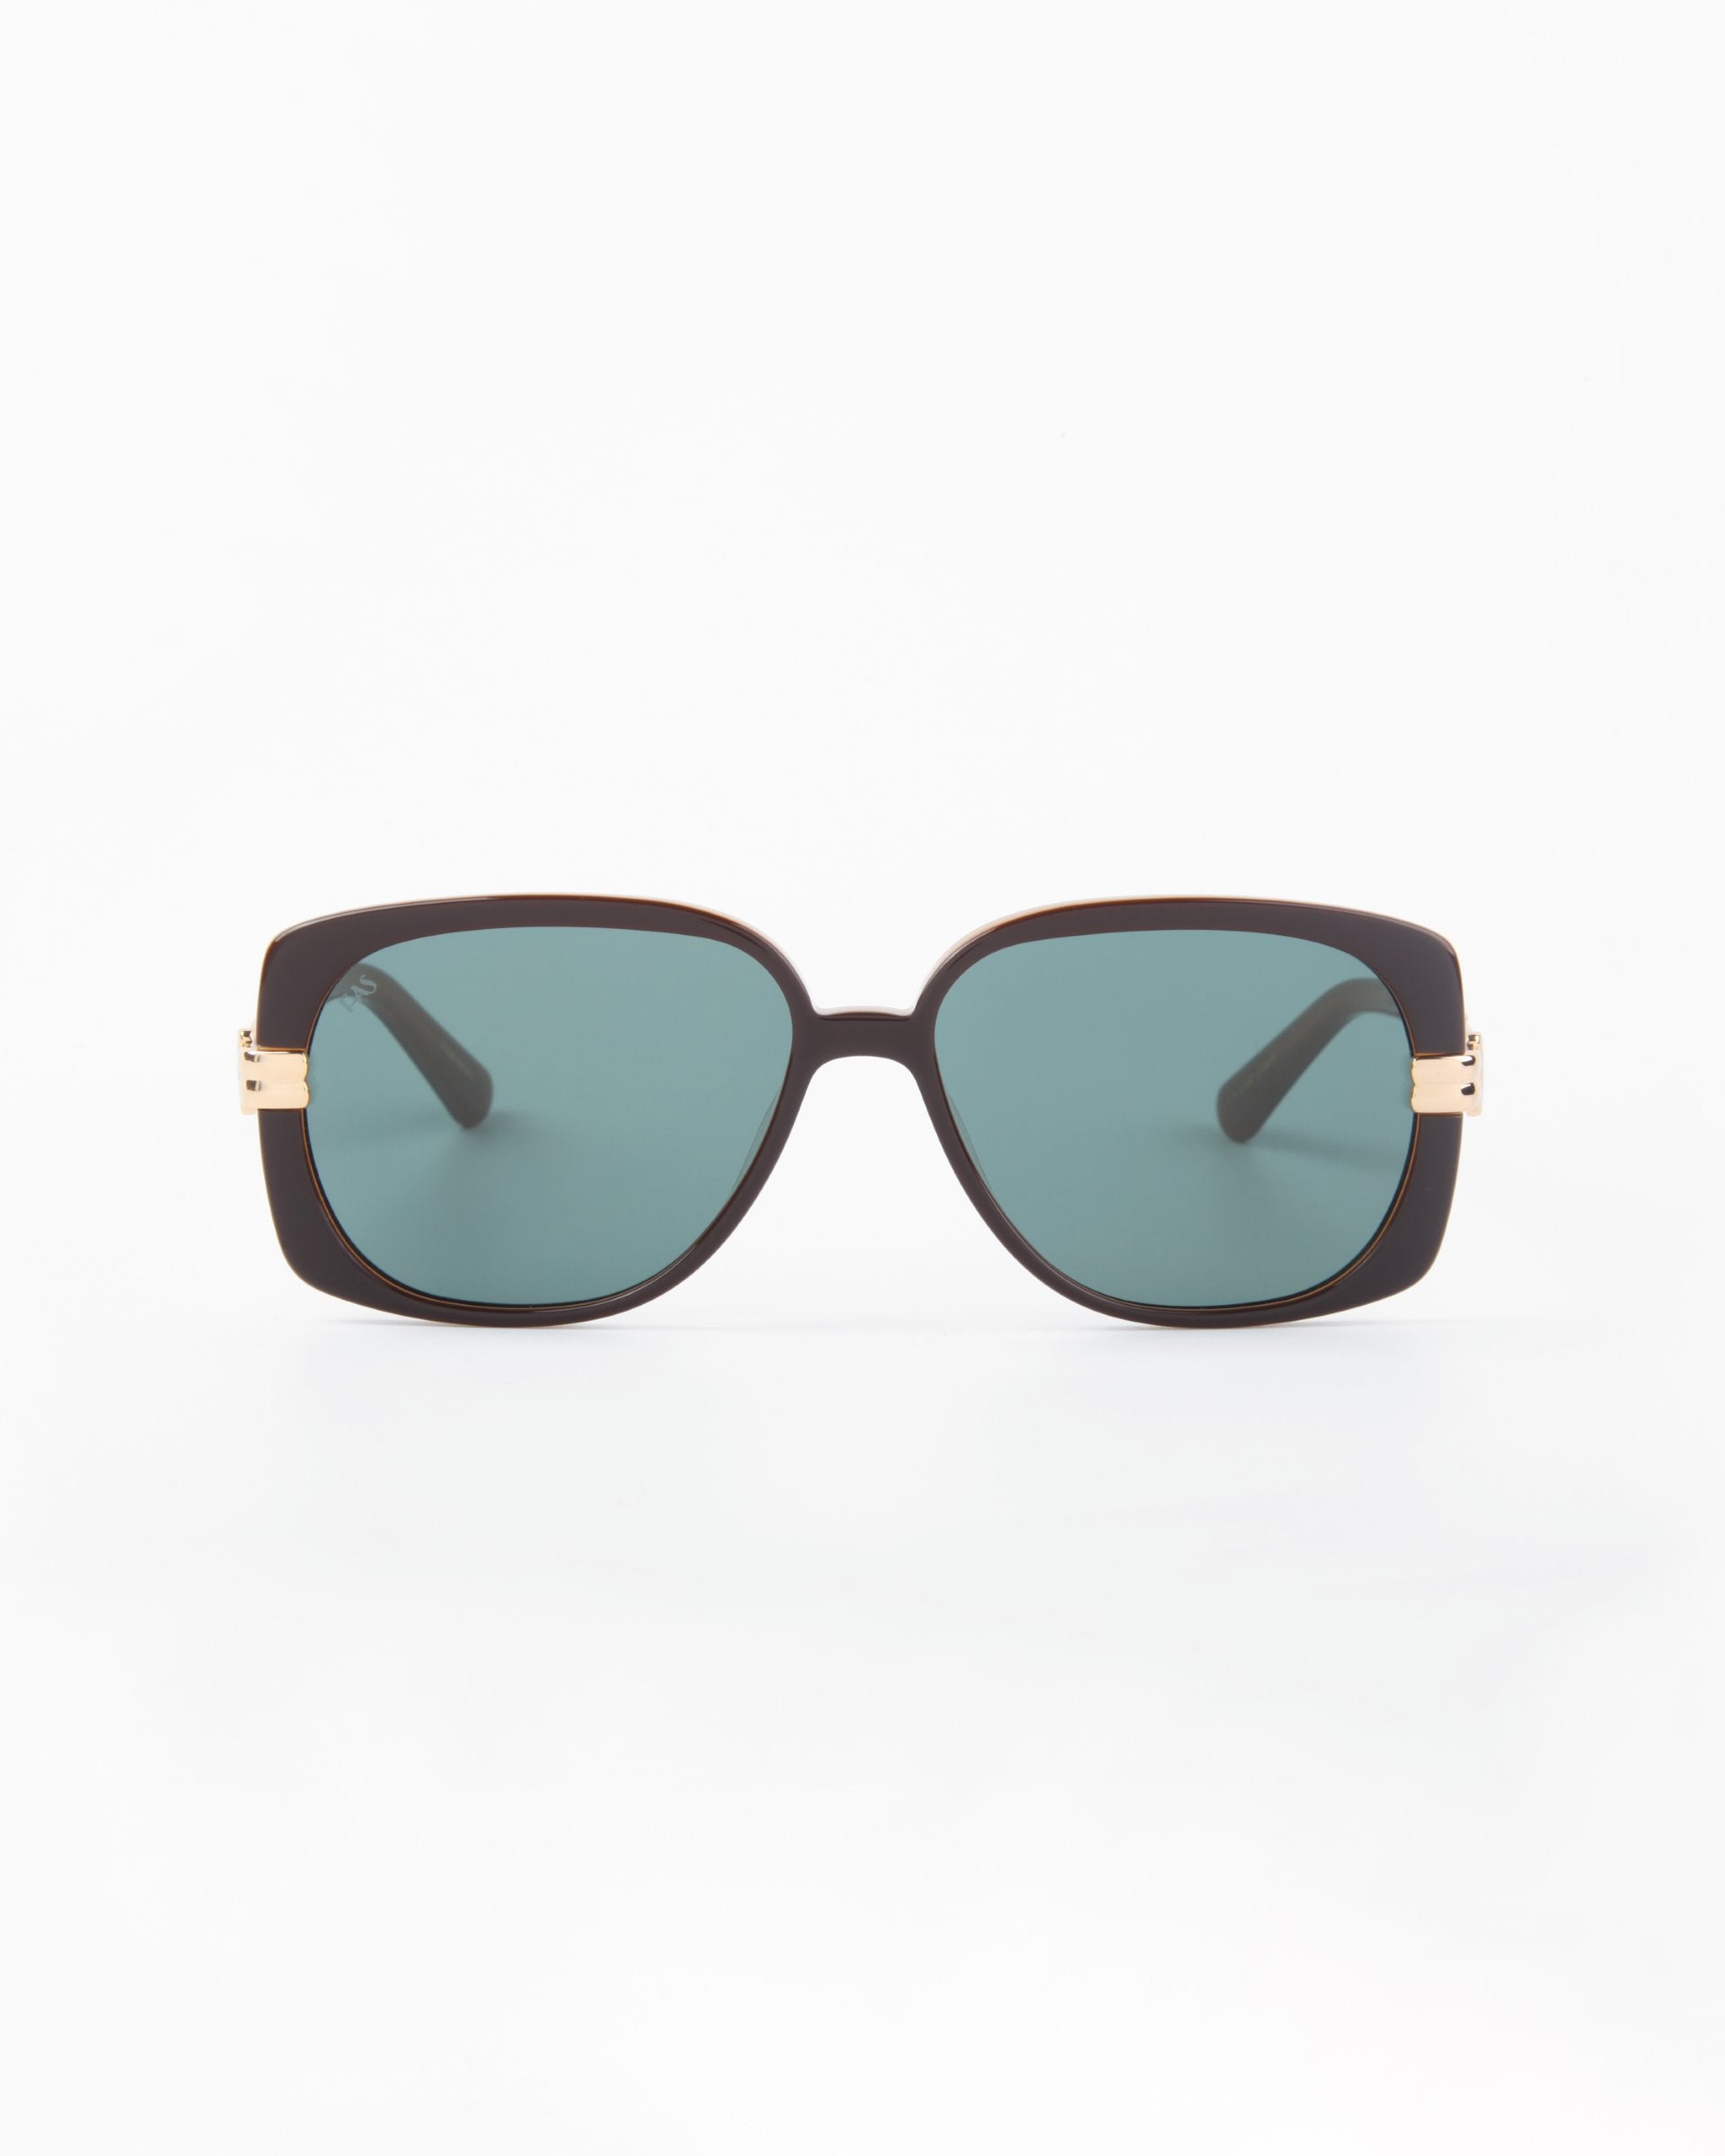 A pair of large, fashionable For Art's Sake® Icon sunglasses with dark rectangular frames, green-tinted shatter resistant nylon lenses, and gold accents on the temples. Handmade with UVA & UVB-protection, the arms of the sunglasses extend directly back from the hinges against a plain white background.